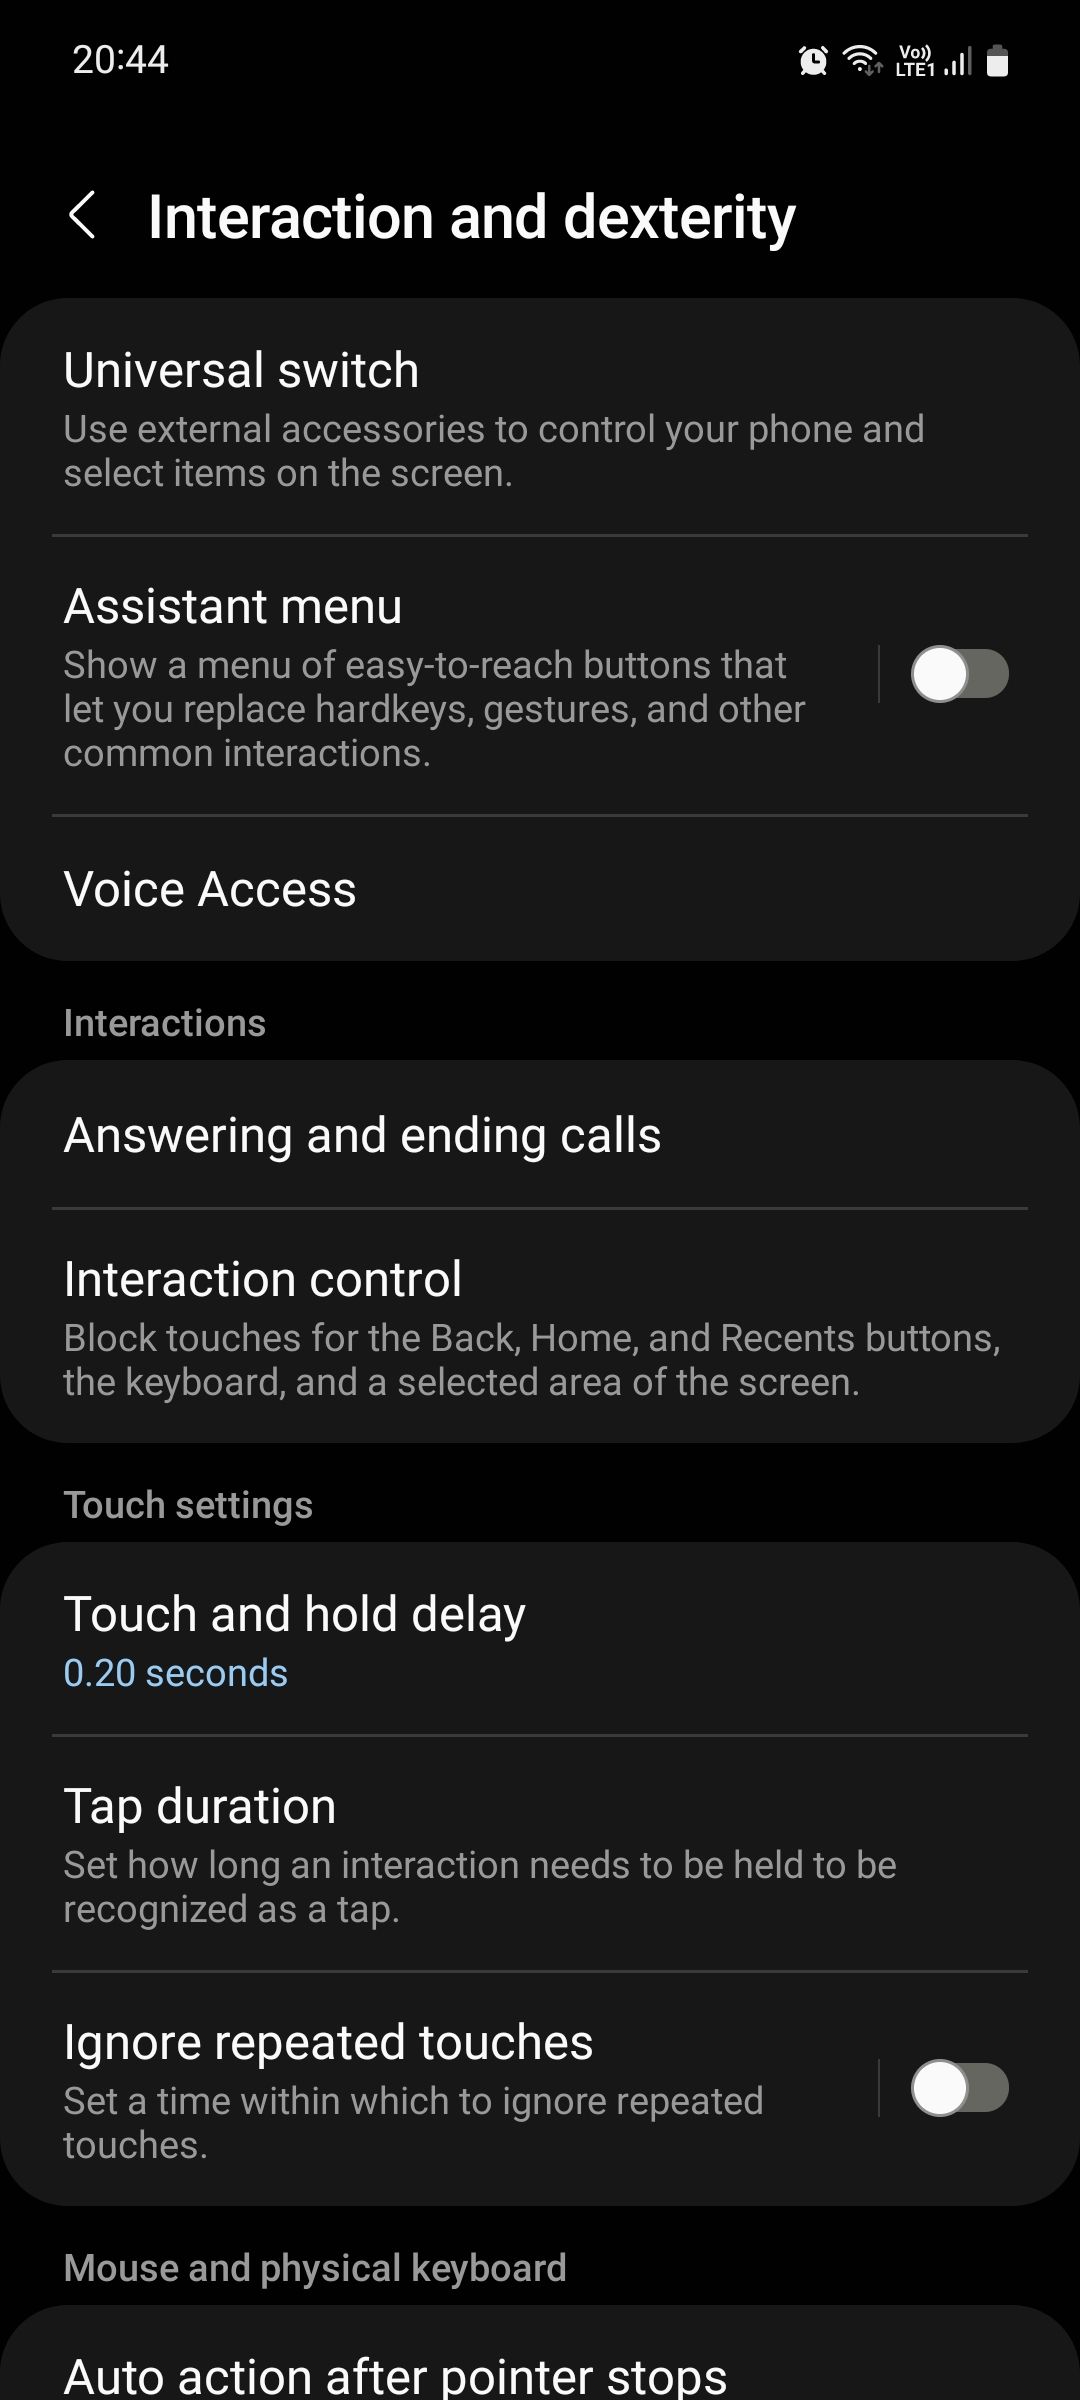 Samsung Accessibility Interaction and dexterity menu